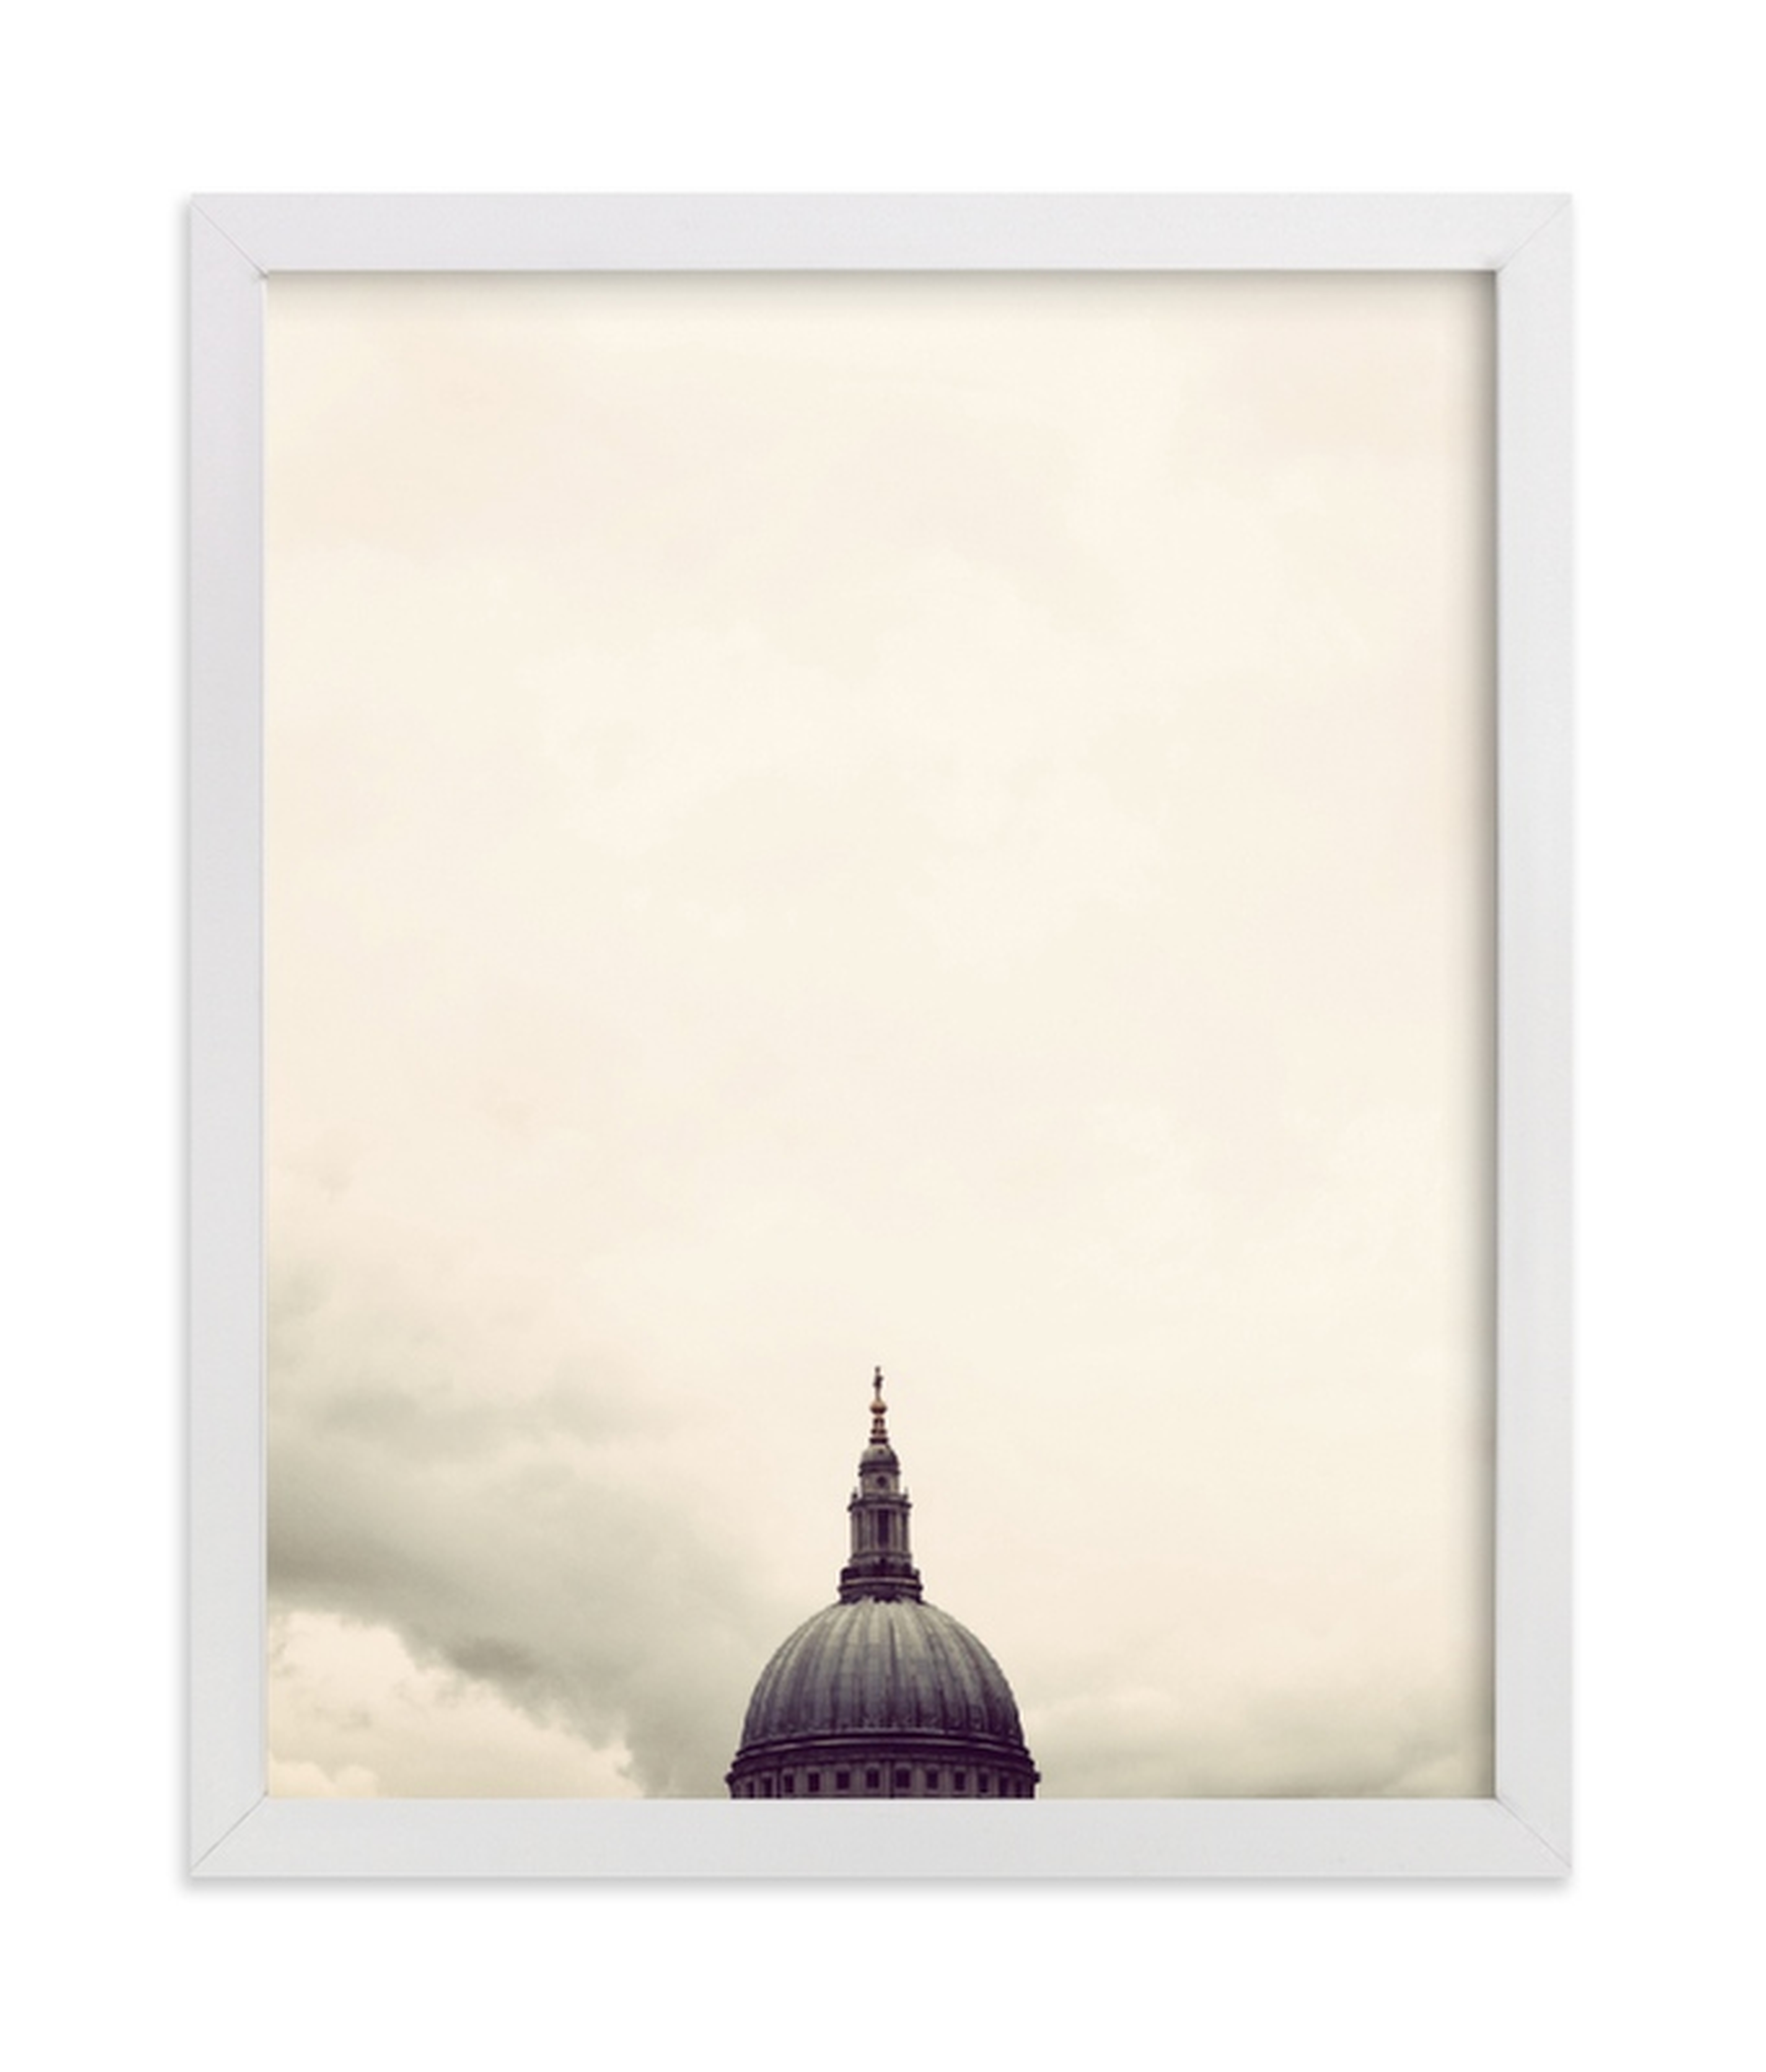 St. Paul's Cathedral, London - 8" x 10" - Minted